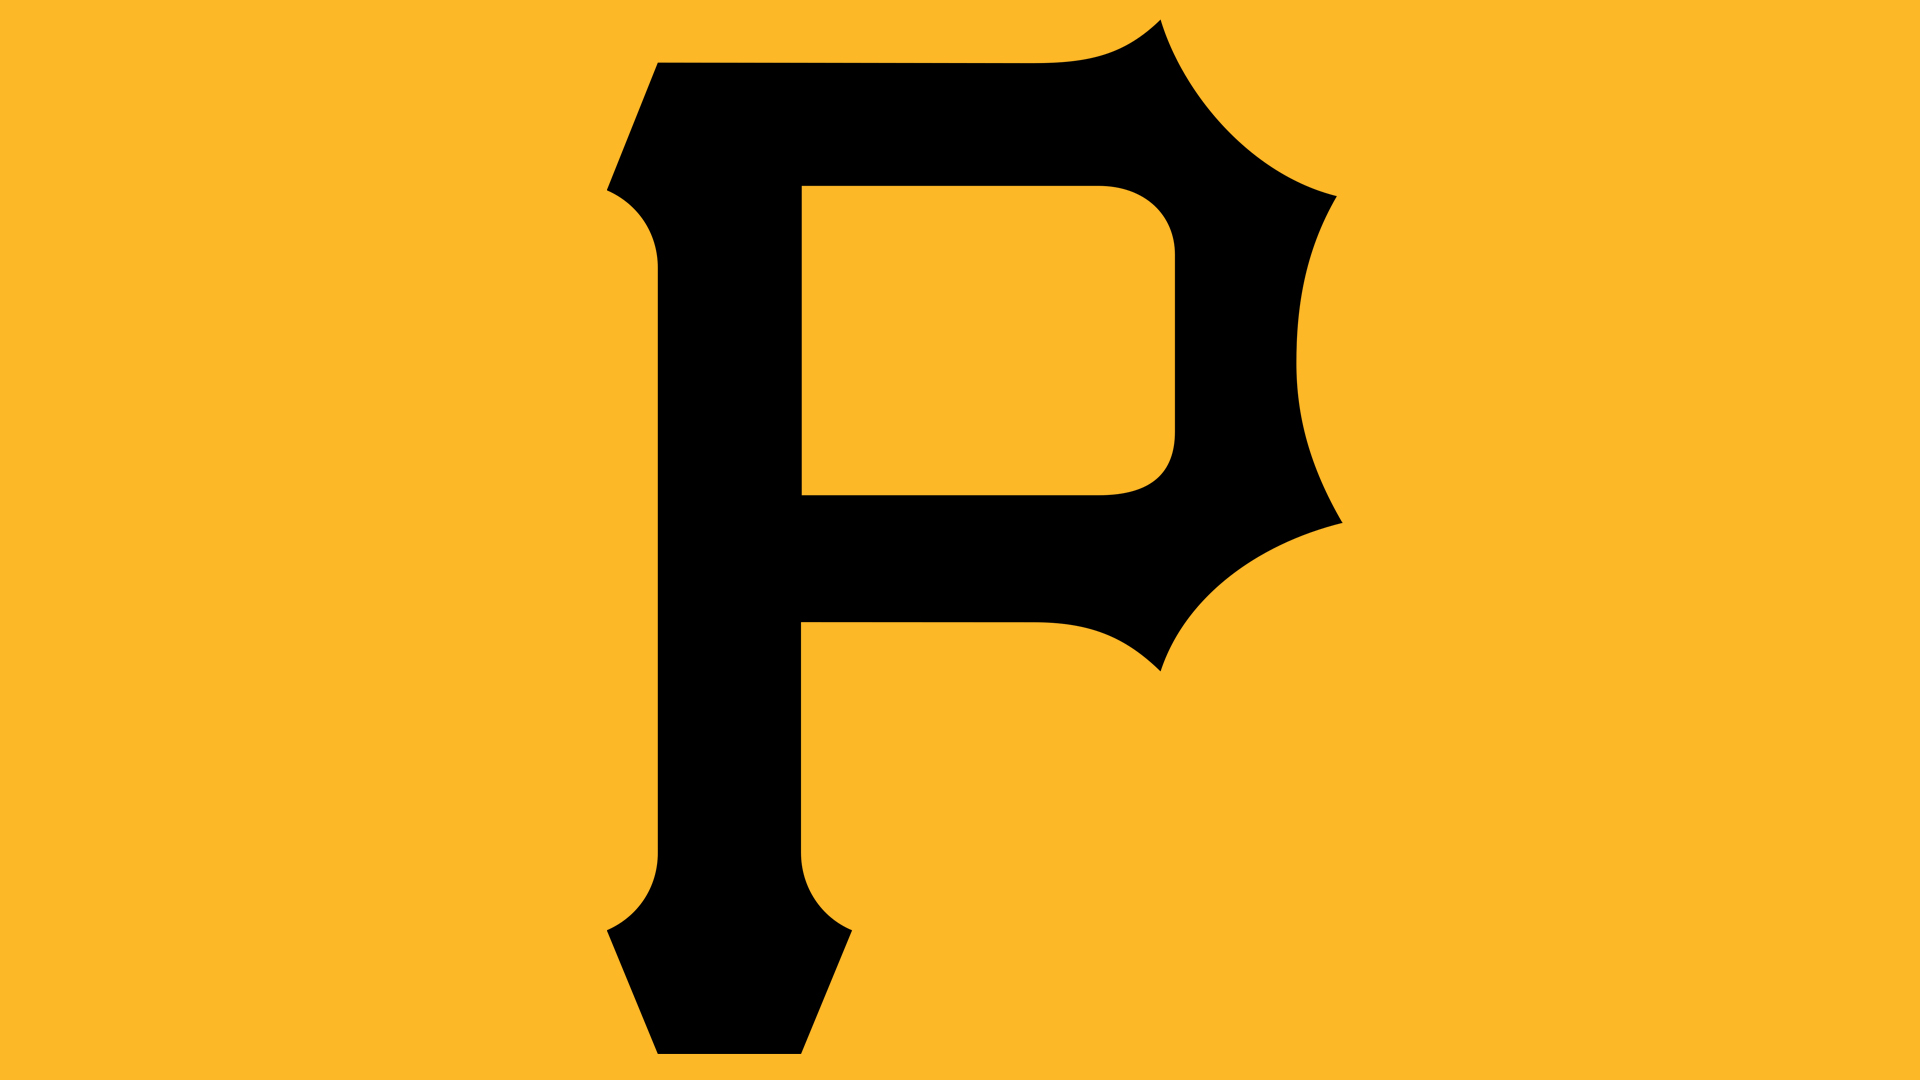 Meaning Pittsburgh Pirates logo and symbol.